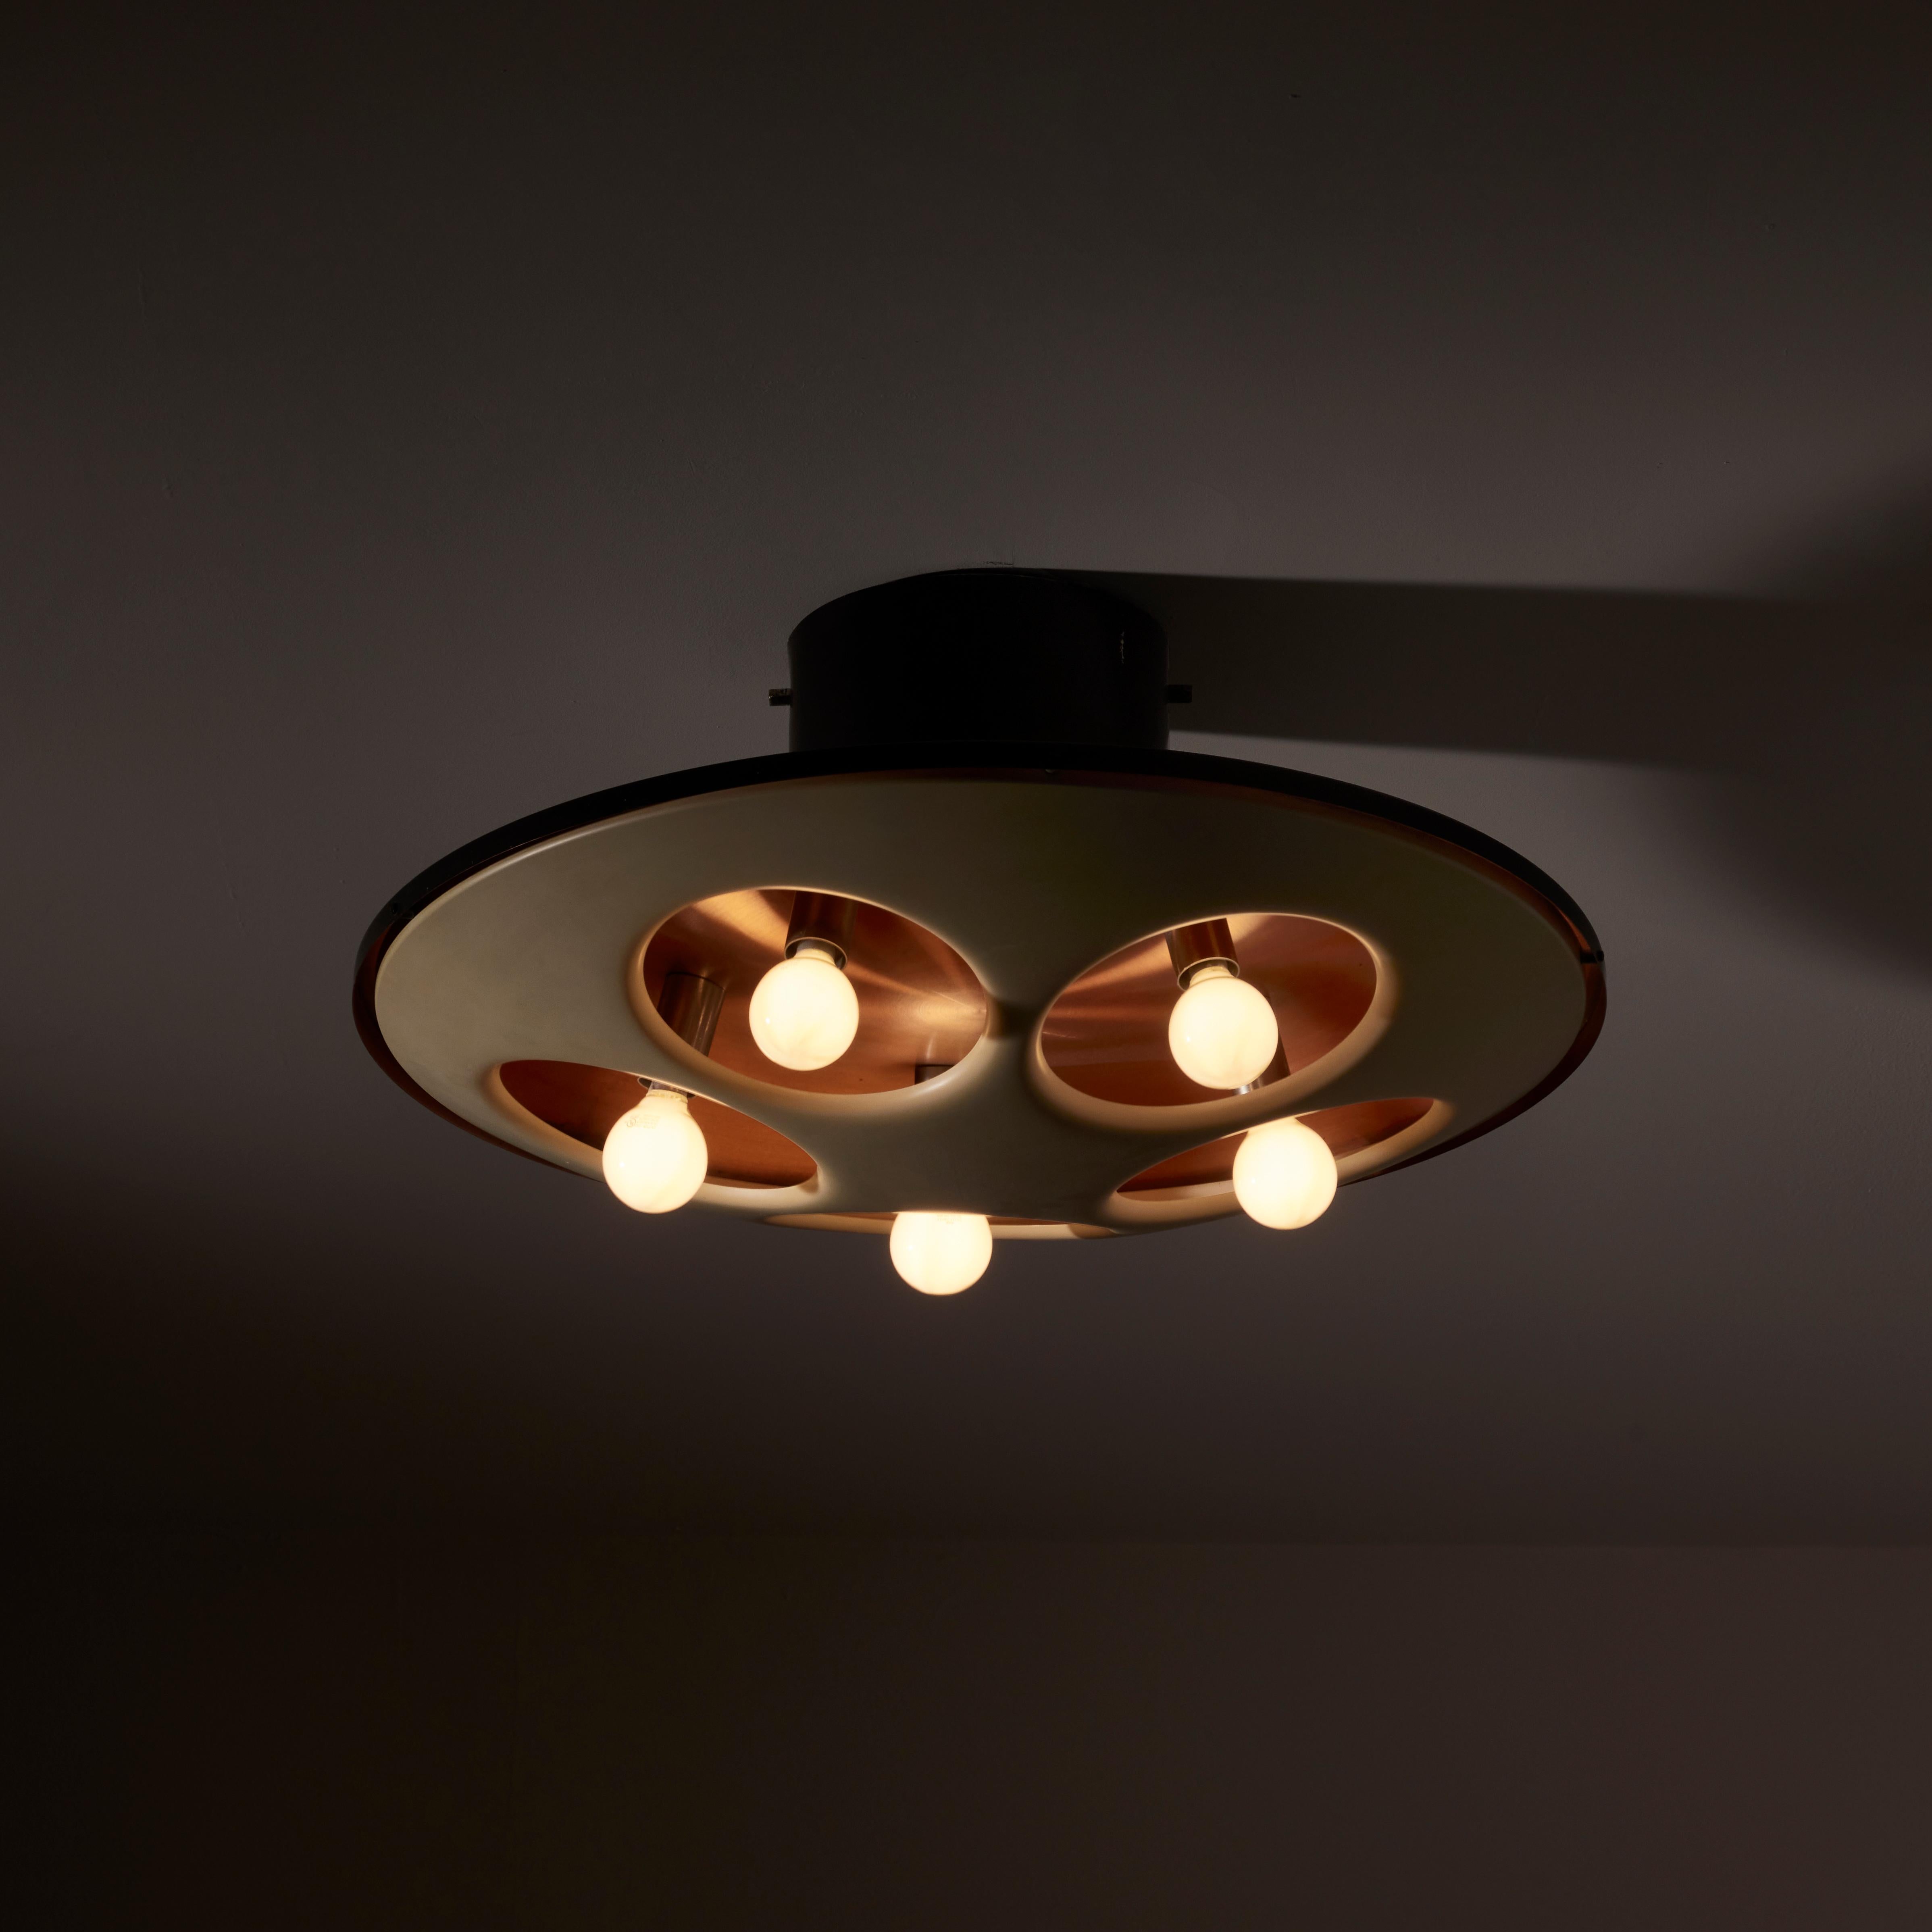 Flushmount ceiling light by Stilnovo. Manufactured in Italy, circa 1950s. Lacquered metal with cut outs encircling the exterior shade. Each hole has a bulb poked through for a nice retro look. Copper interior finish is shown through. Rewired for